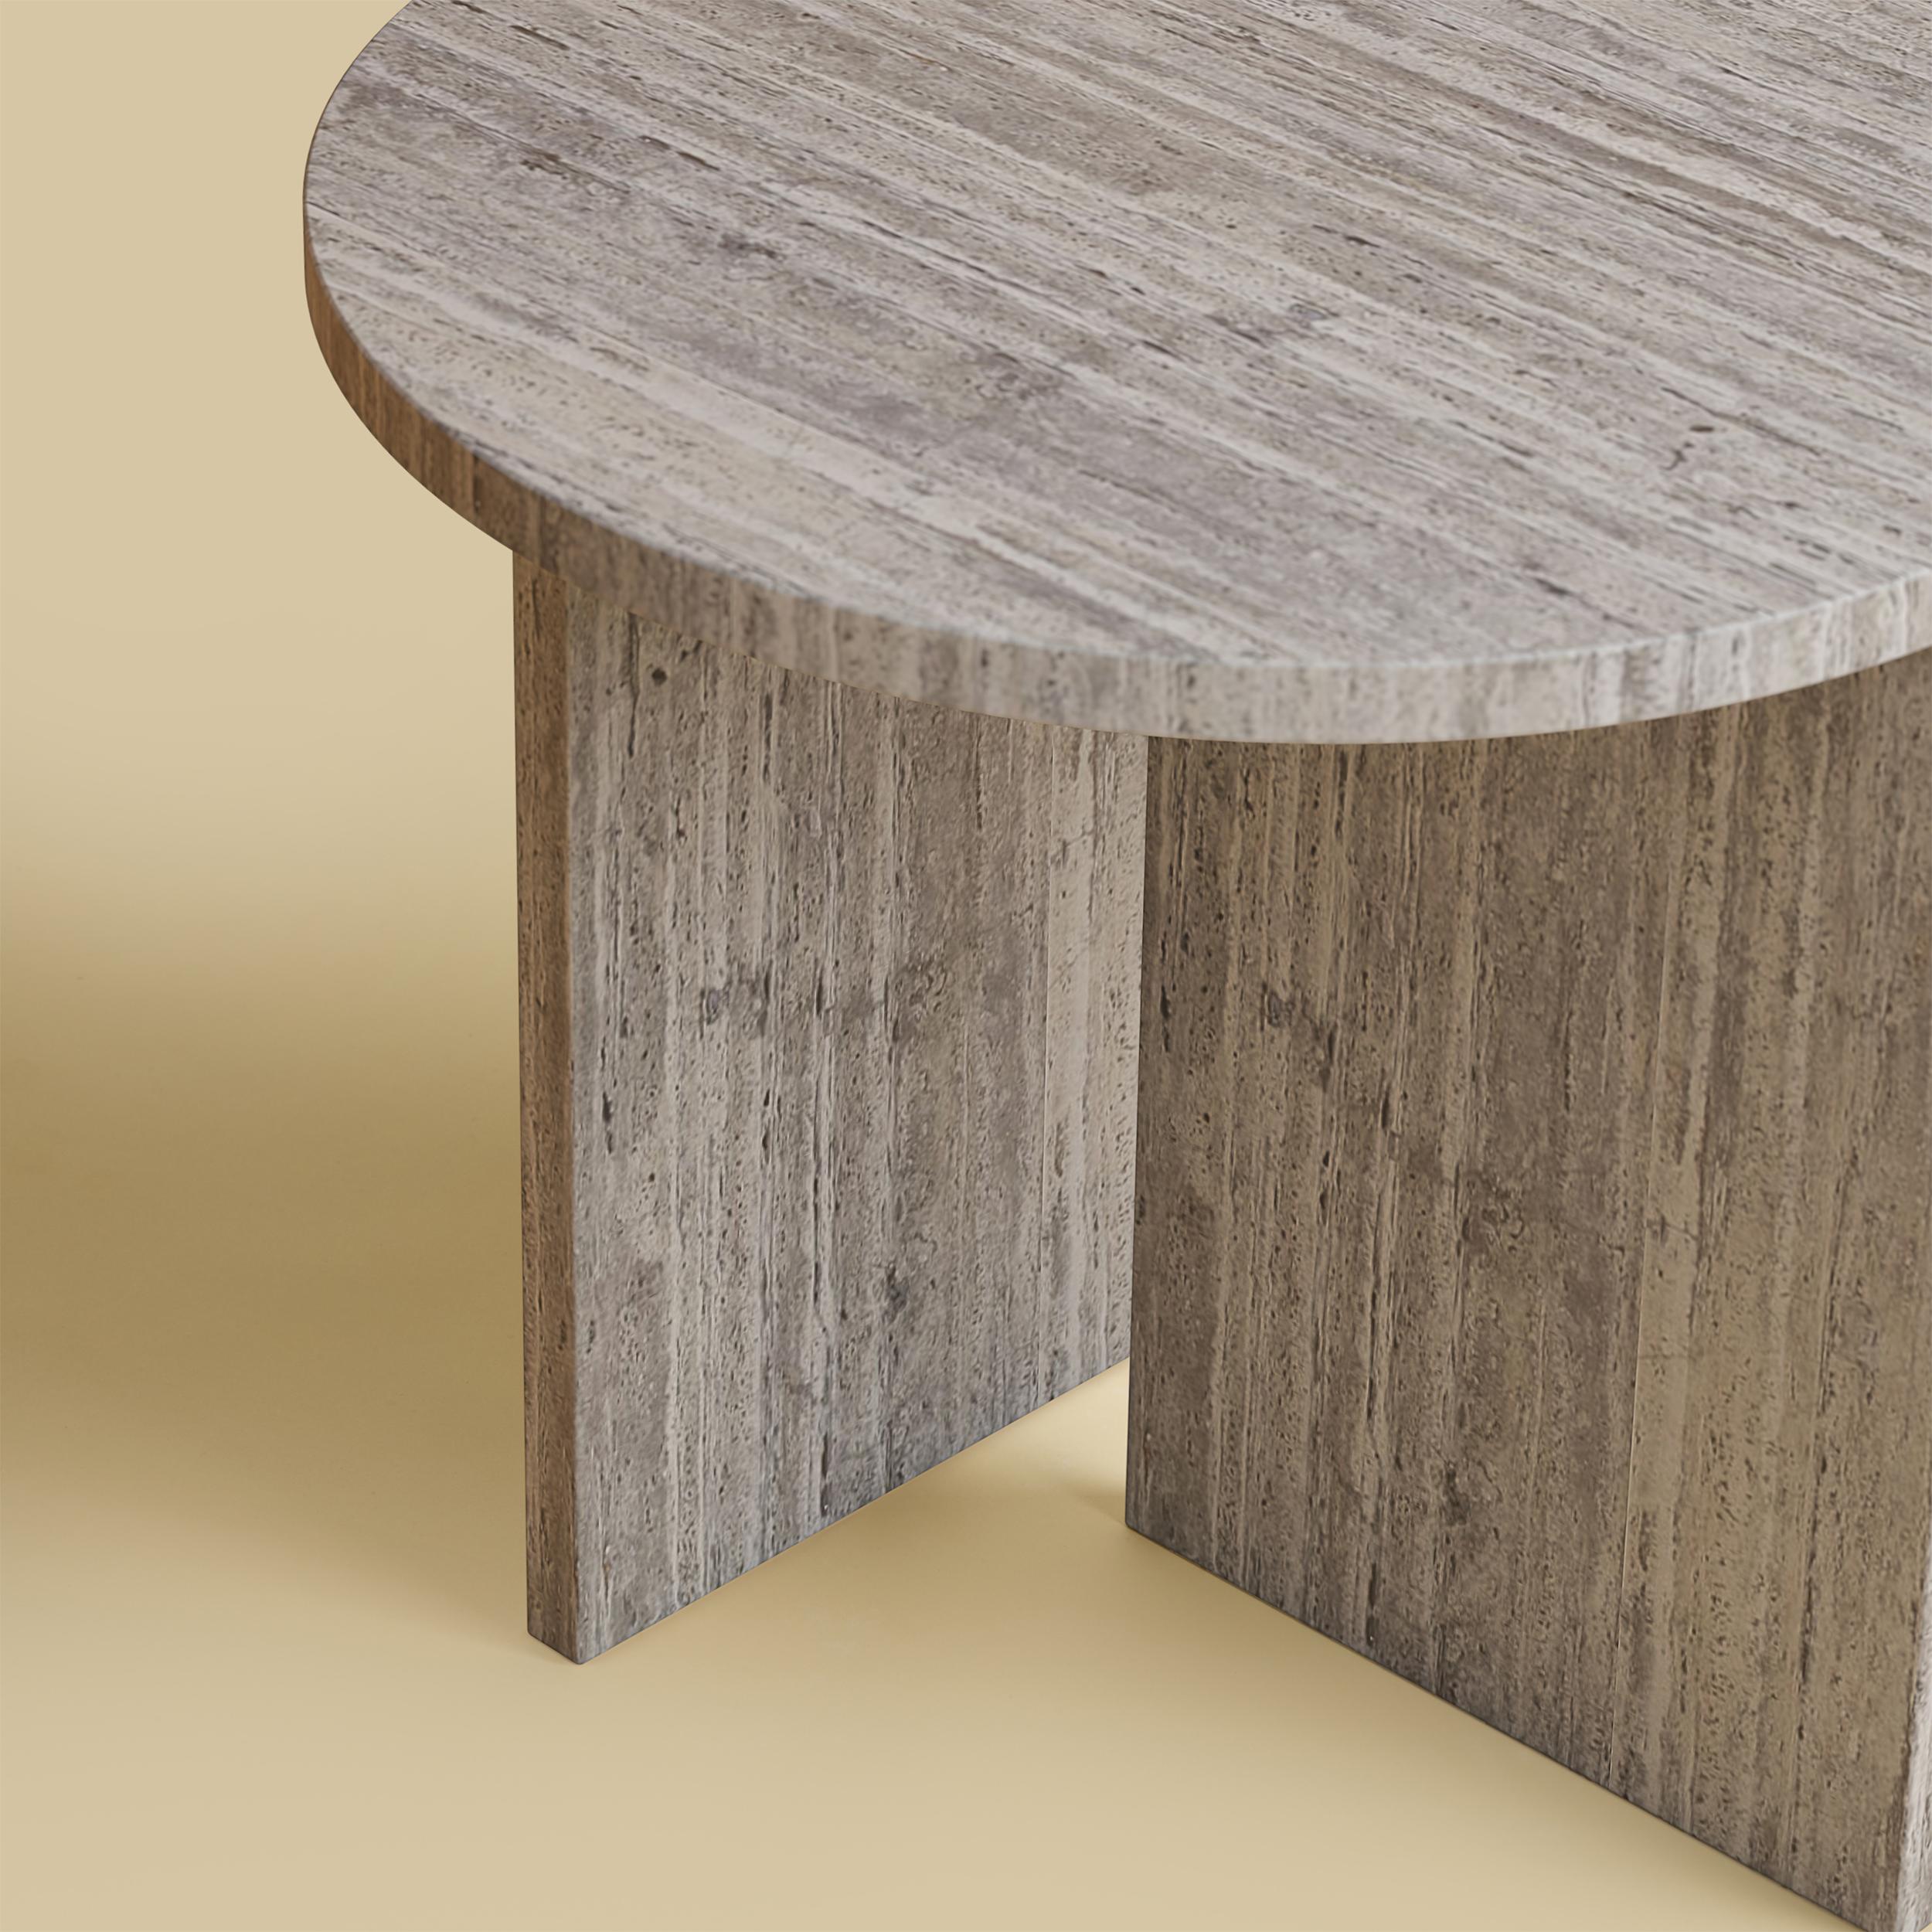 The Kyushu coffee table is made entirely of Titanium Travertine. The top is circular and 45cm in diameter, the legs are made from two marble boards in which one part is inlaid on the top as a very elegant detail.
Artisanal production made of